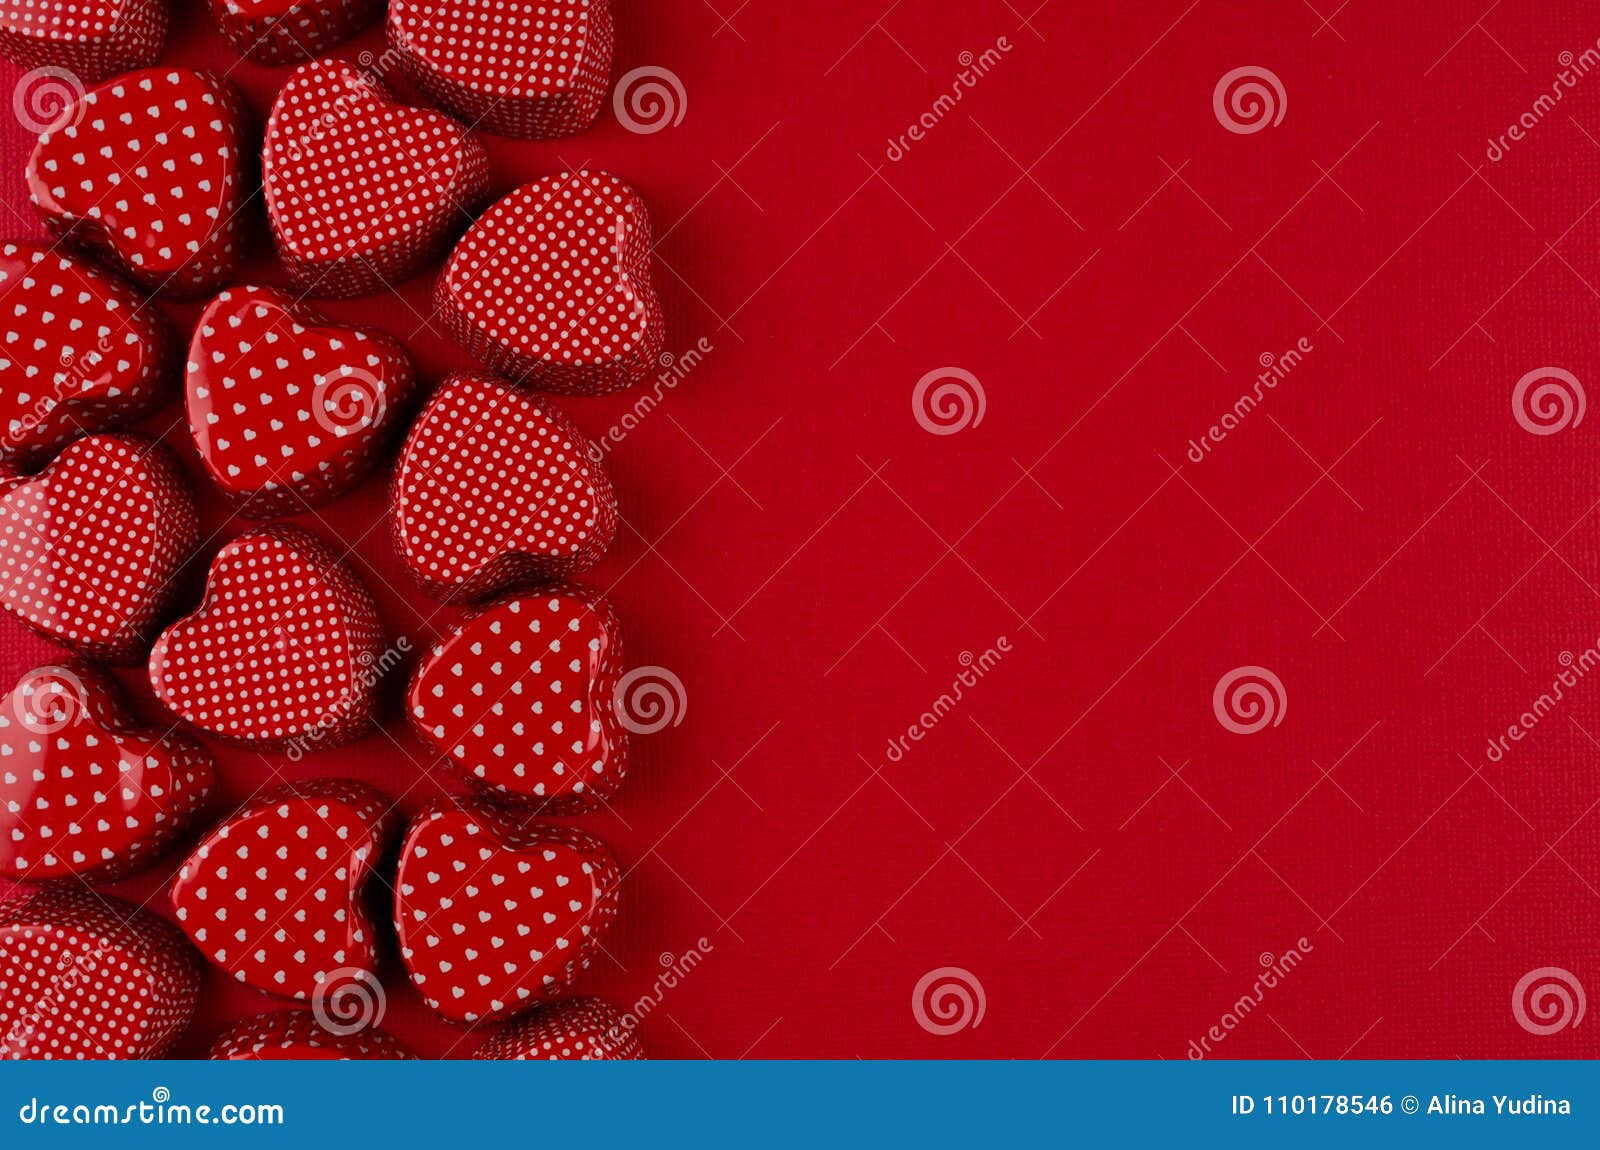 245,016 Happy Valentines Day Stock Photos - Free & Royalty-Free Stock  Photos from Dreamstime